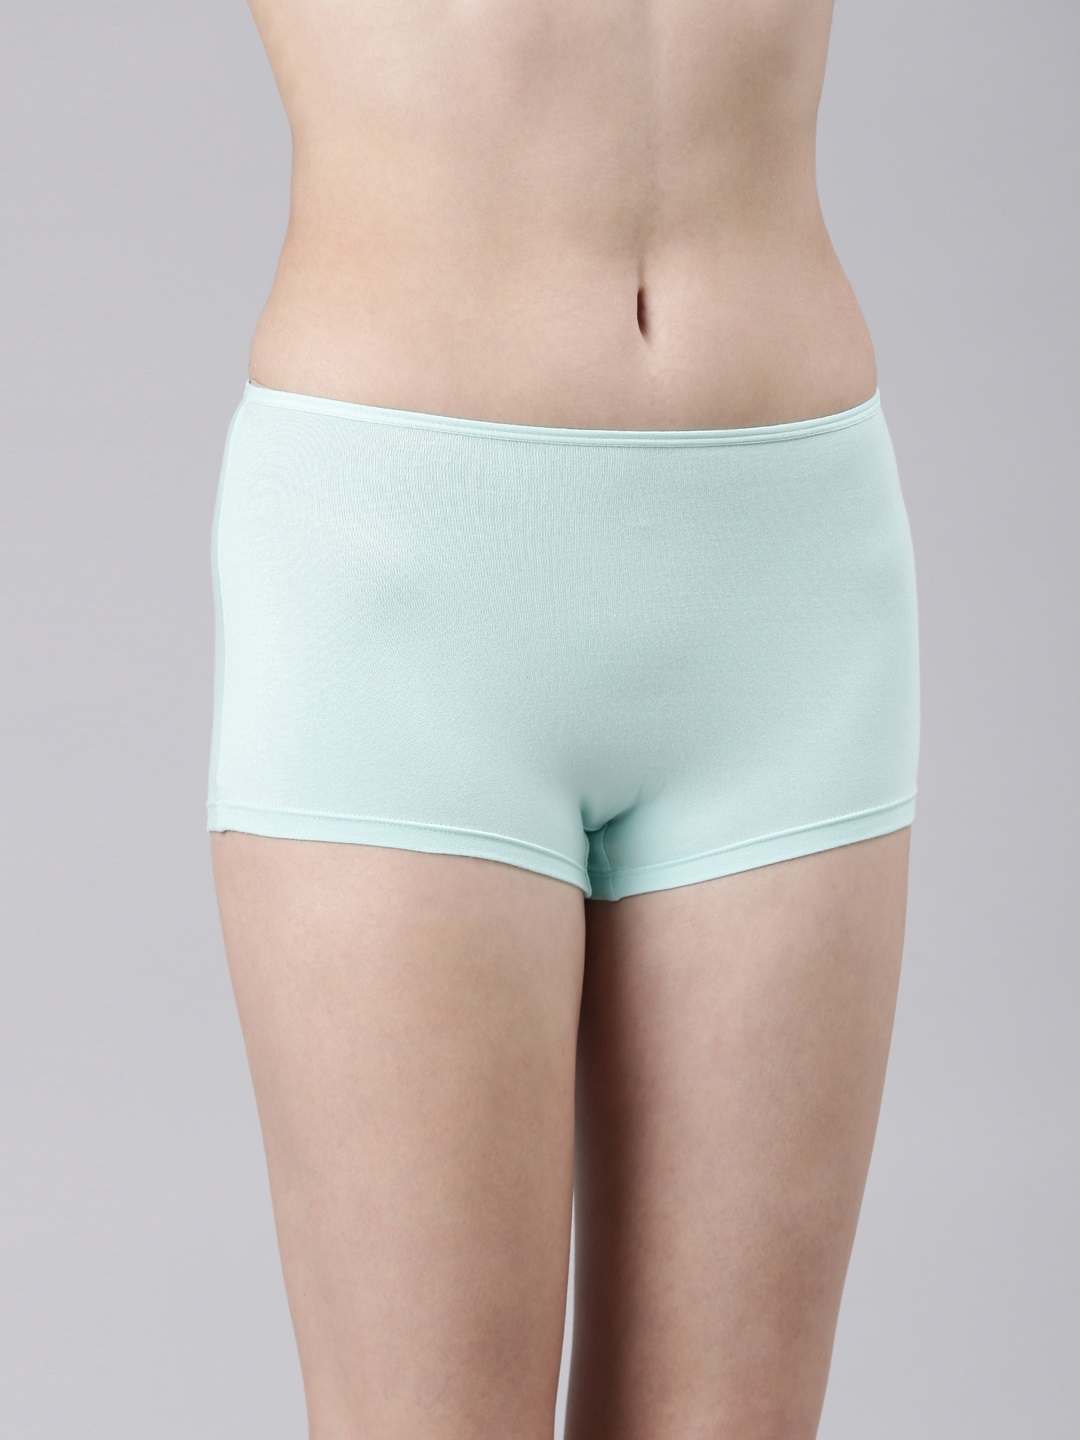 Solid Women Branded and stylish briefs for girls at Rs 50/piece in